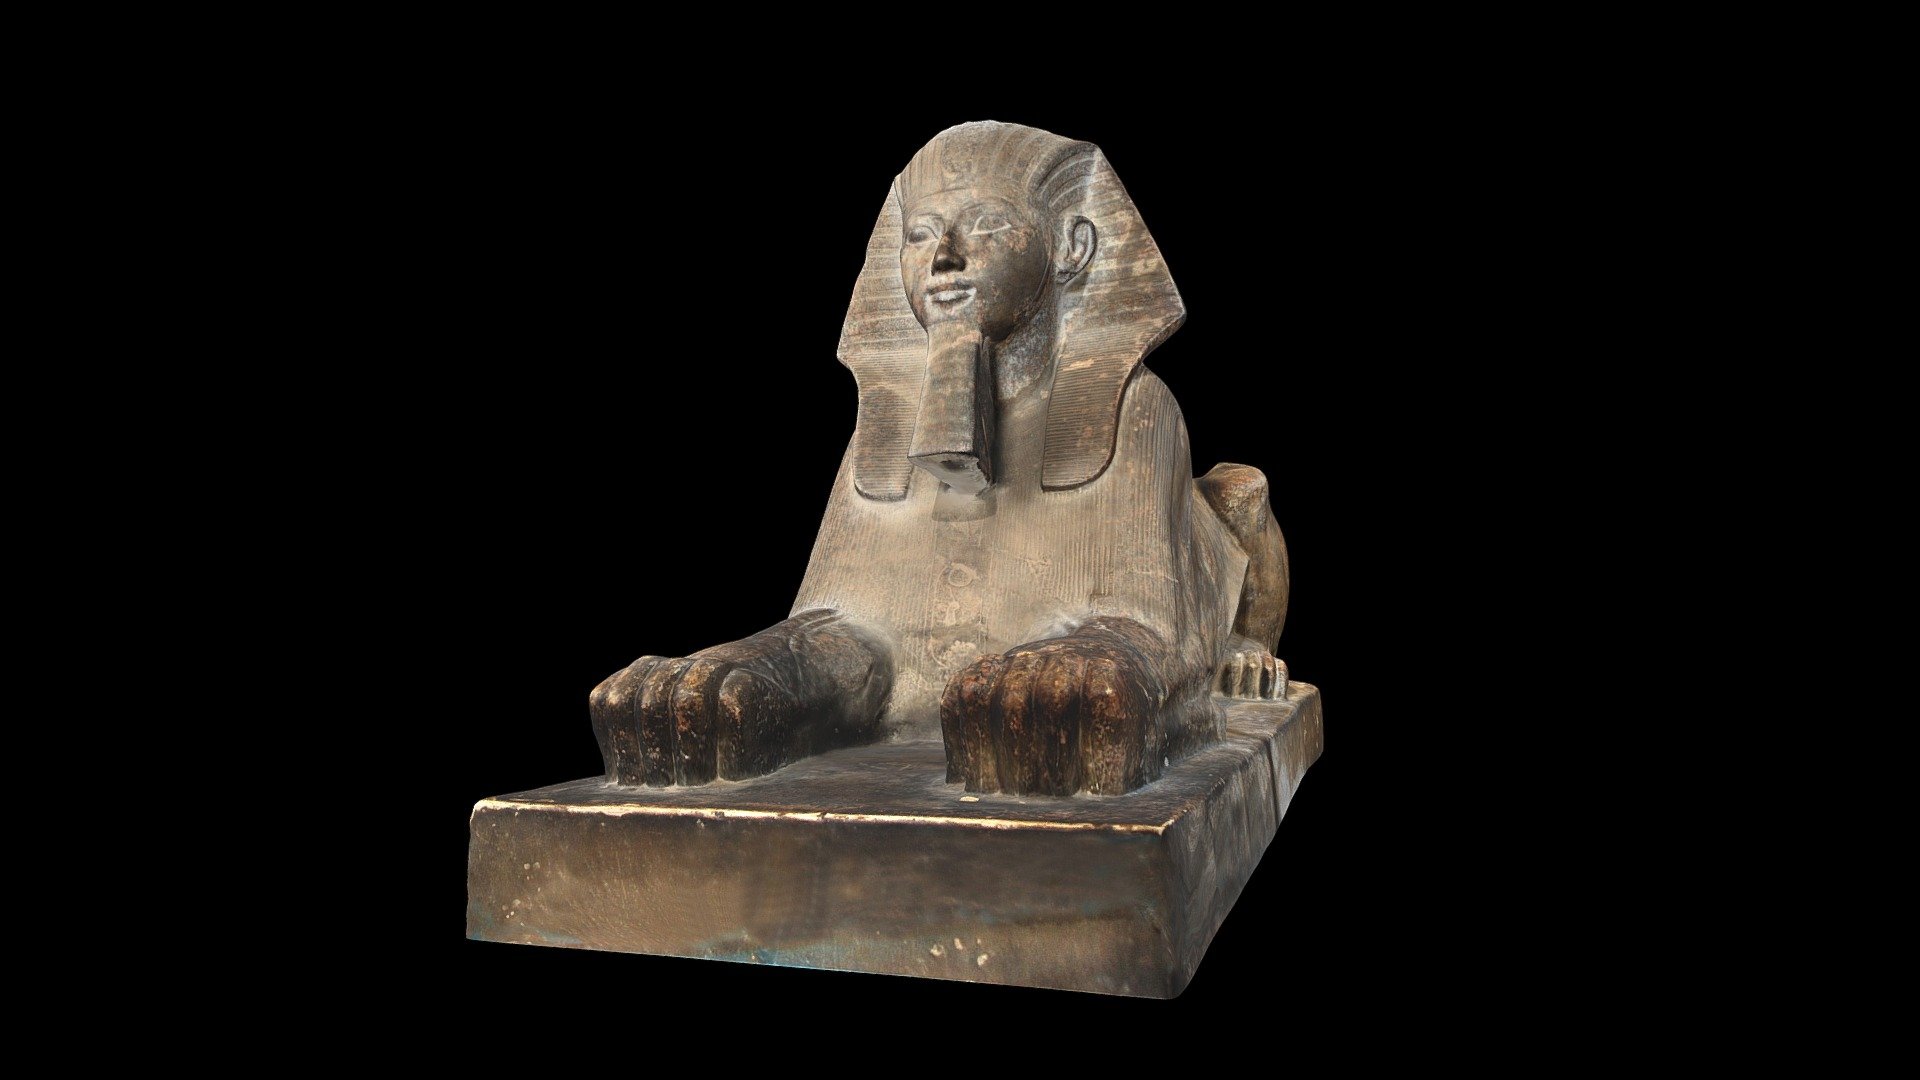 Date: New Kingdom, Eighteenth Dynasty, Reign of Hatshepsut (c. 1508 BCE–1458 BCE)
Provenance: Mortuary Temple of Hatshepsut at Deir el-Bahari, Thebes: West
Material: Red Granite
Current Location: Gallery R6, Egyptian Museum, Cairo, Egypt. 
INV. No. JE 53114 + JE 55191

Model courtesy of David Anderson, Department of Archaeology and Anthropology, University of Wisconsin-La Crosse (www.sketchfab.com/danderson4 and www.uwlax.edu/archaeology) - Granite Sphinx Statue of Hatshepsut - 3D model by ARCE 3d model